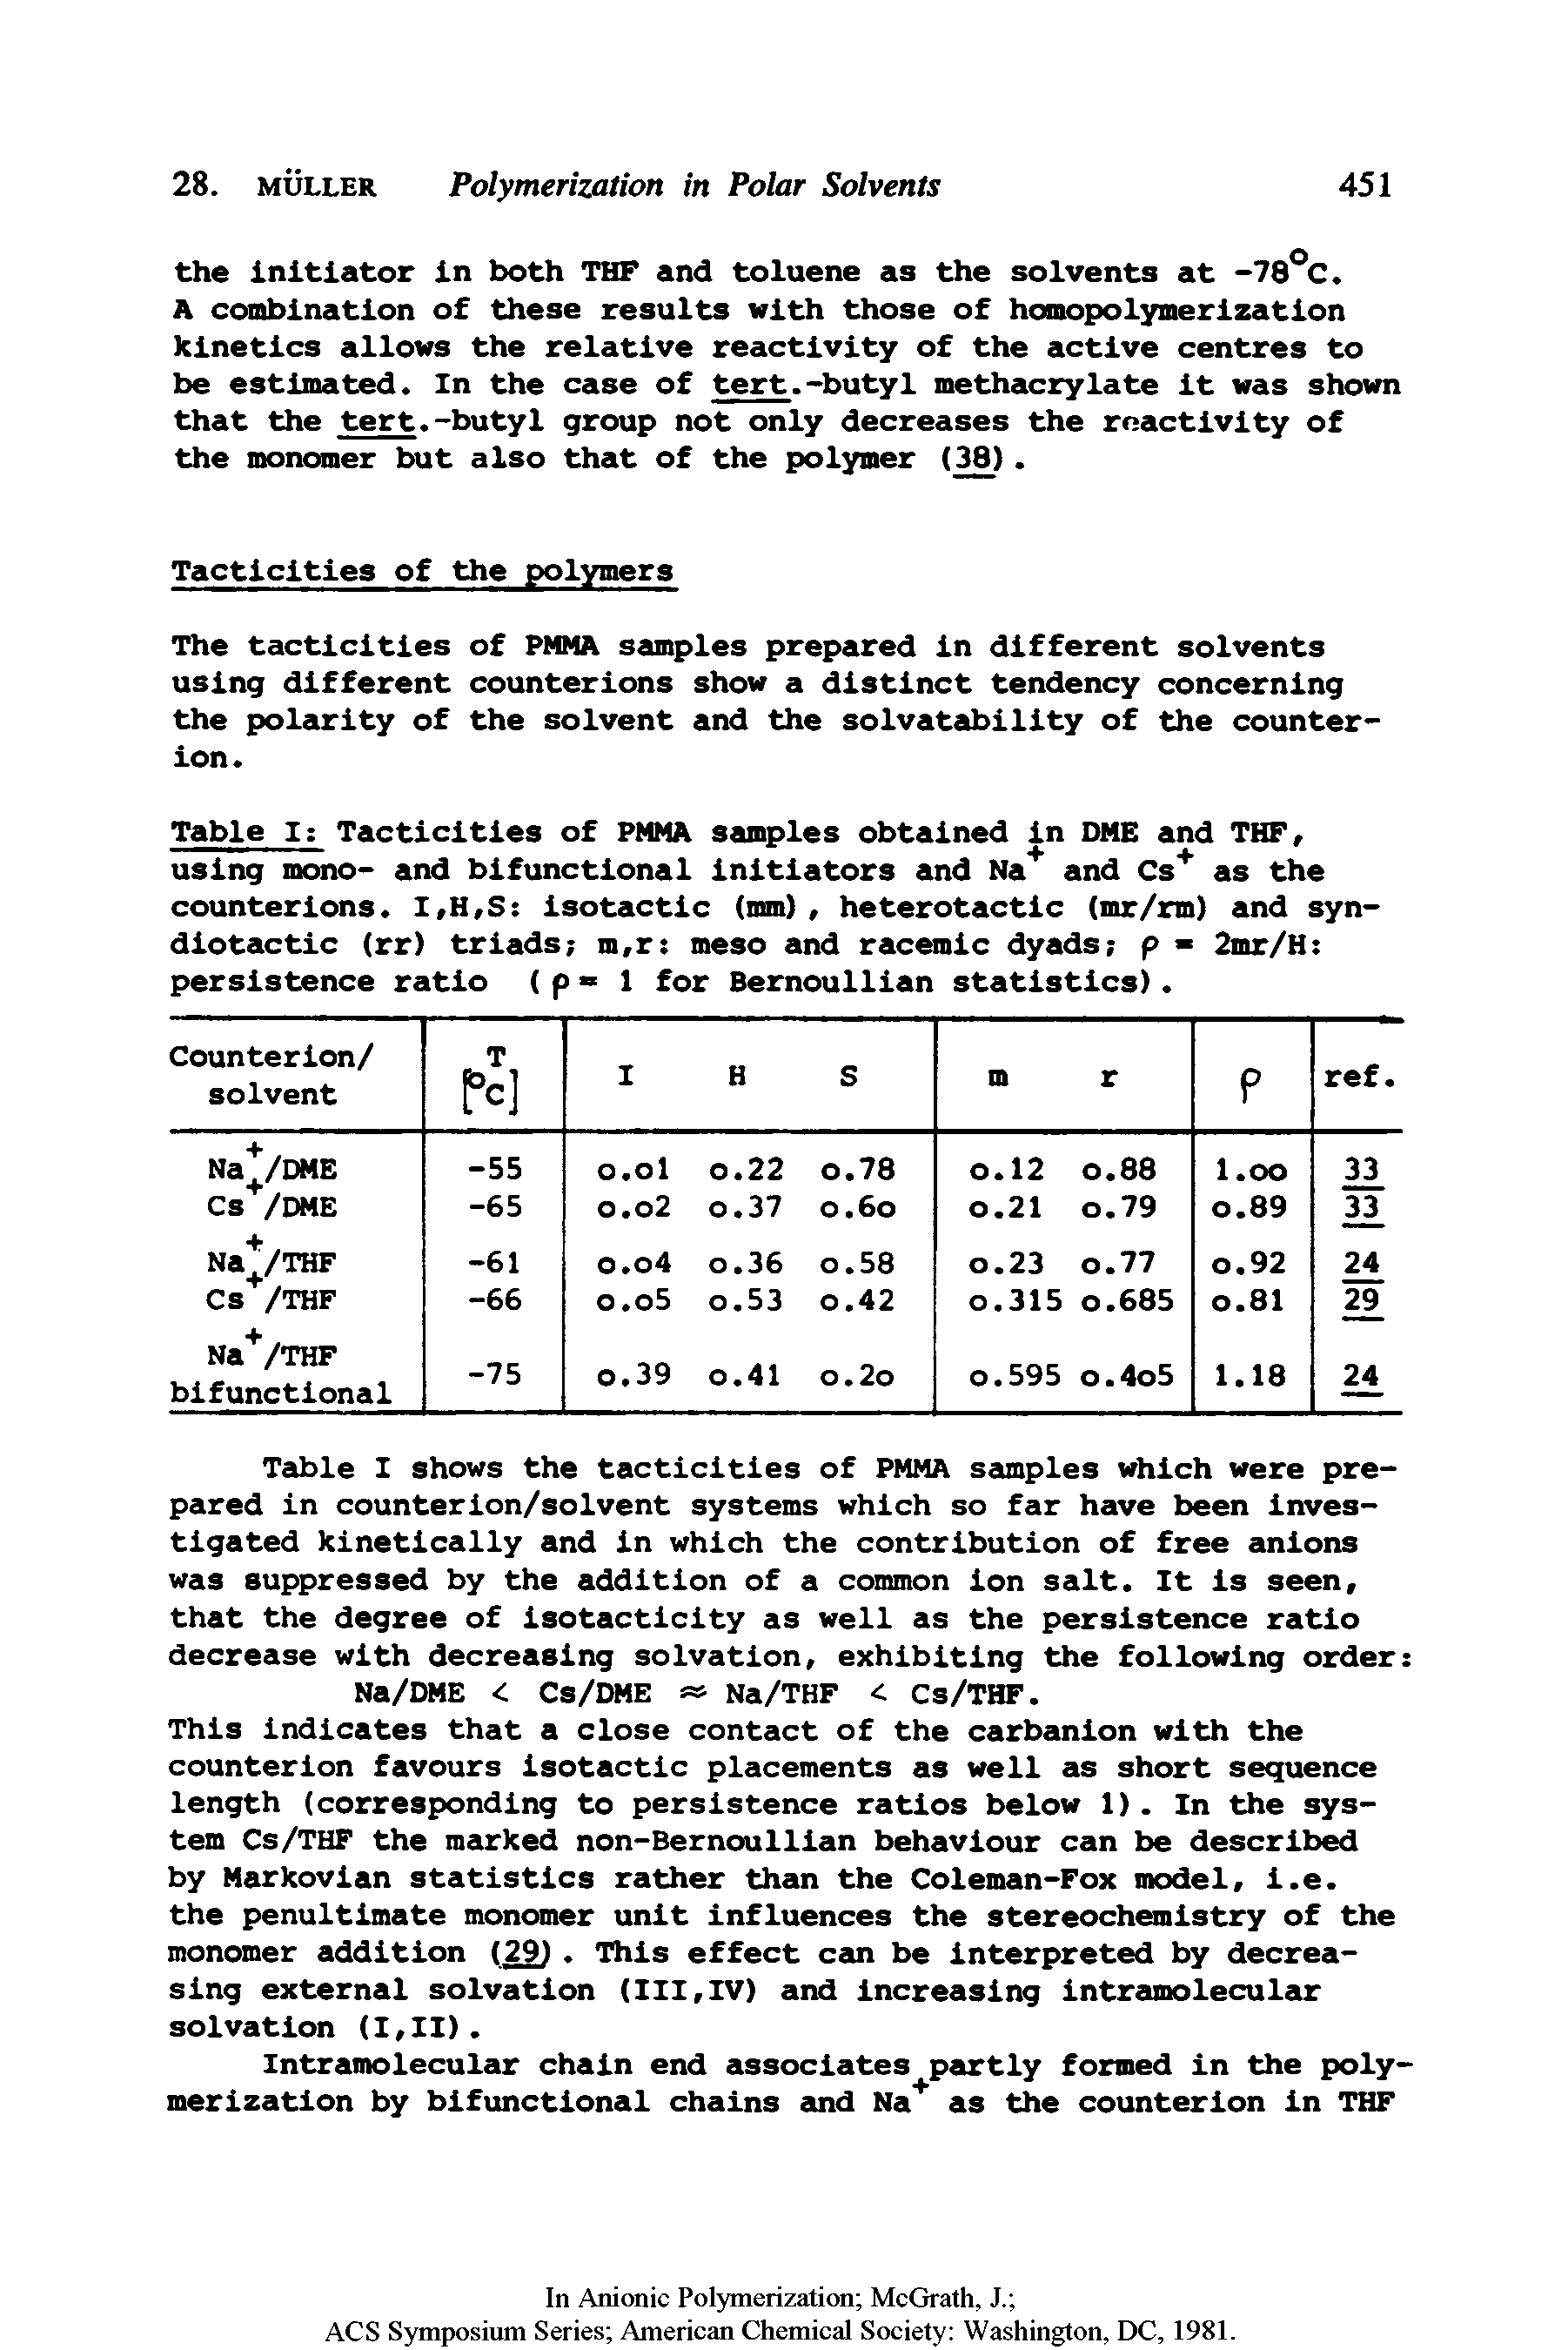 Table I shows the tacticities of PMMA samples which were prepared in counterion/solvent systems which so far have been investigated kinetically and in which the contribution of free anions was suppressed by the addition of a common ion salt. It is seen, that the degree of isotacticity as well as the persistence ratio decrease with decreasing solvation, exhibiting the following order Na/DME < Cs/DME Na/THF < Cs/THF.